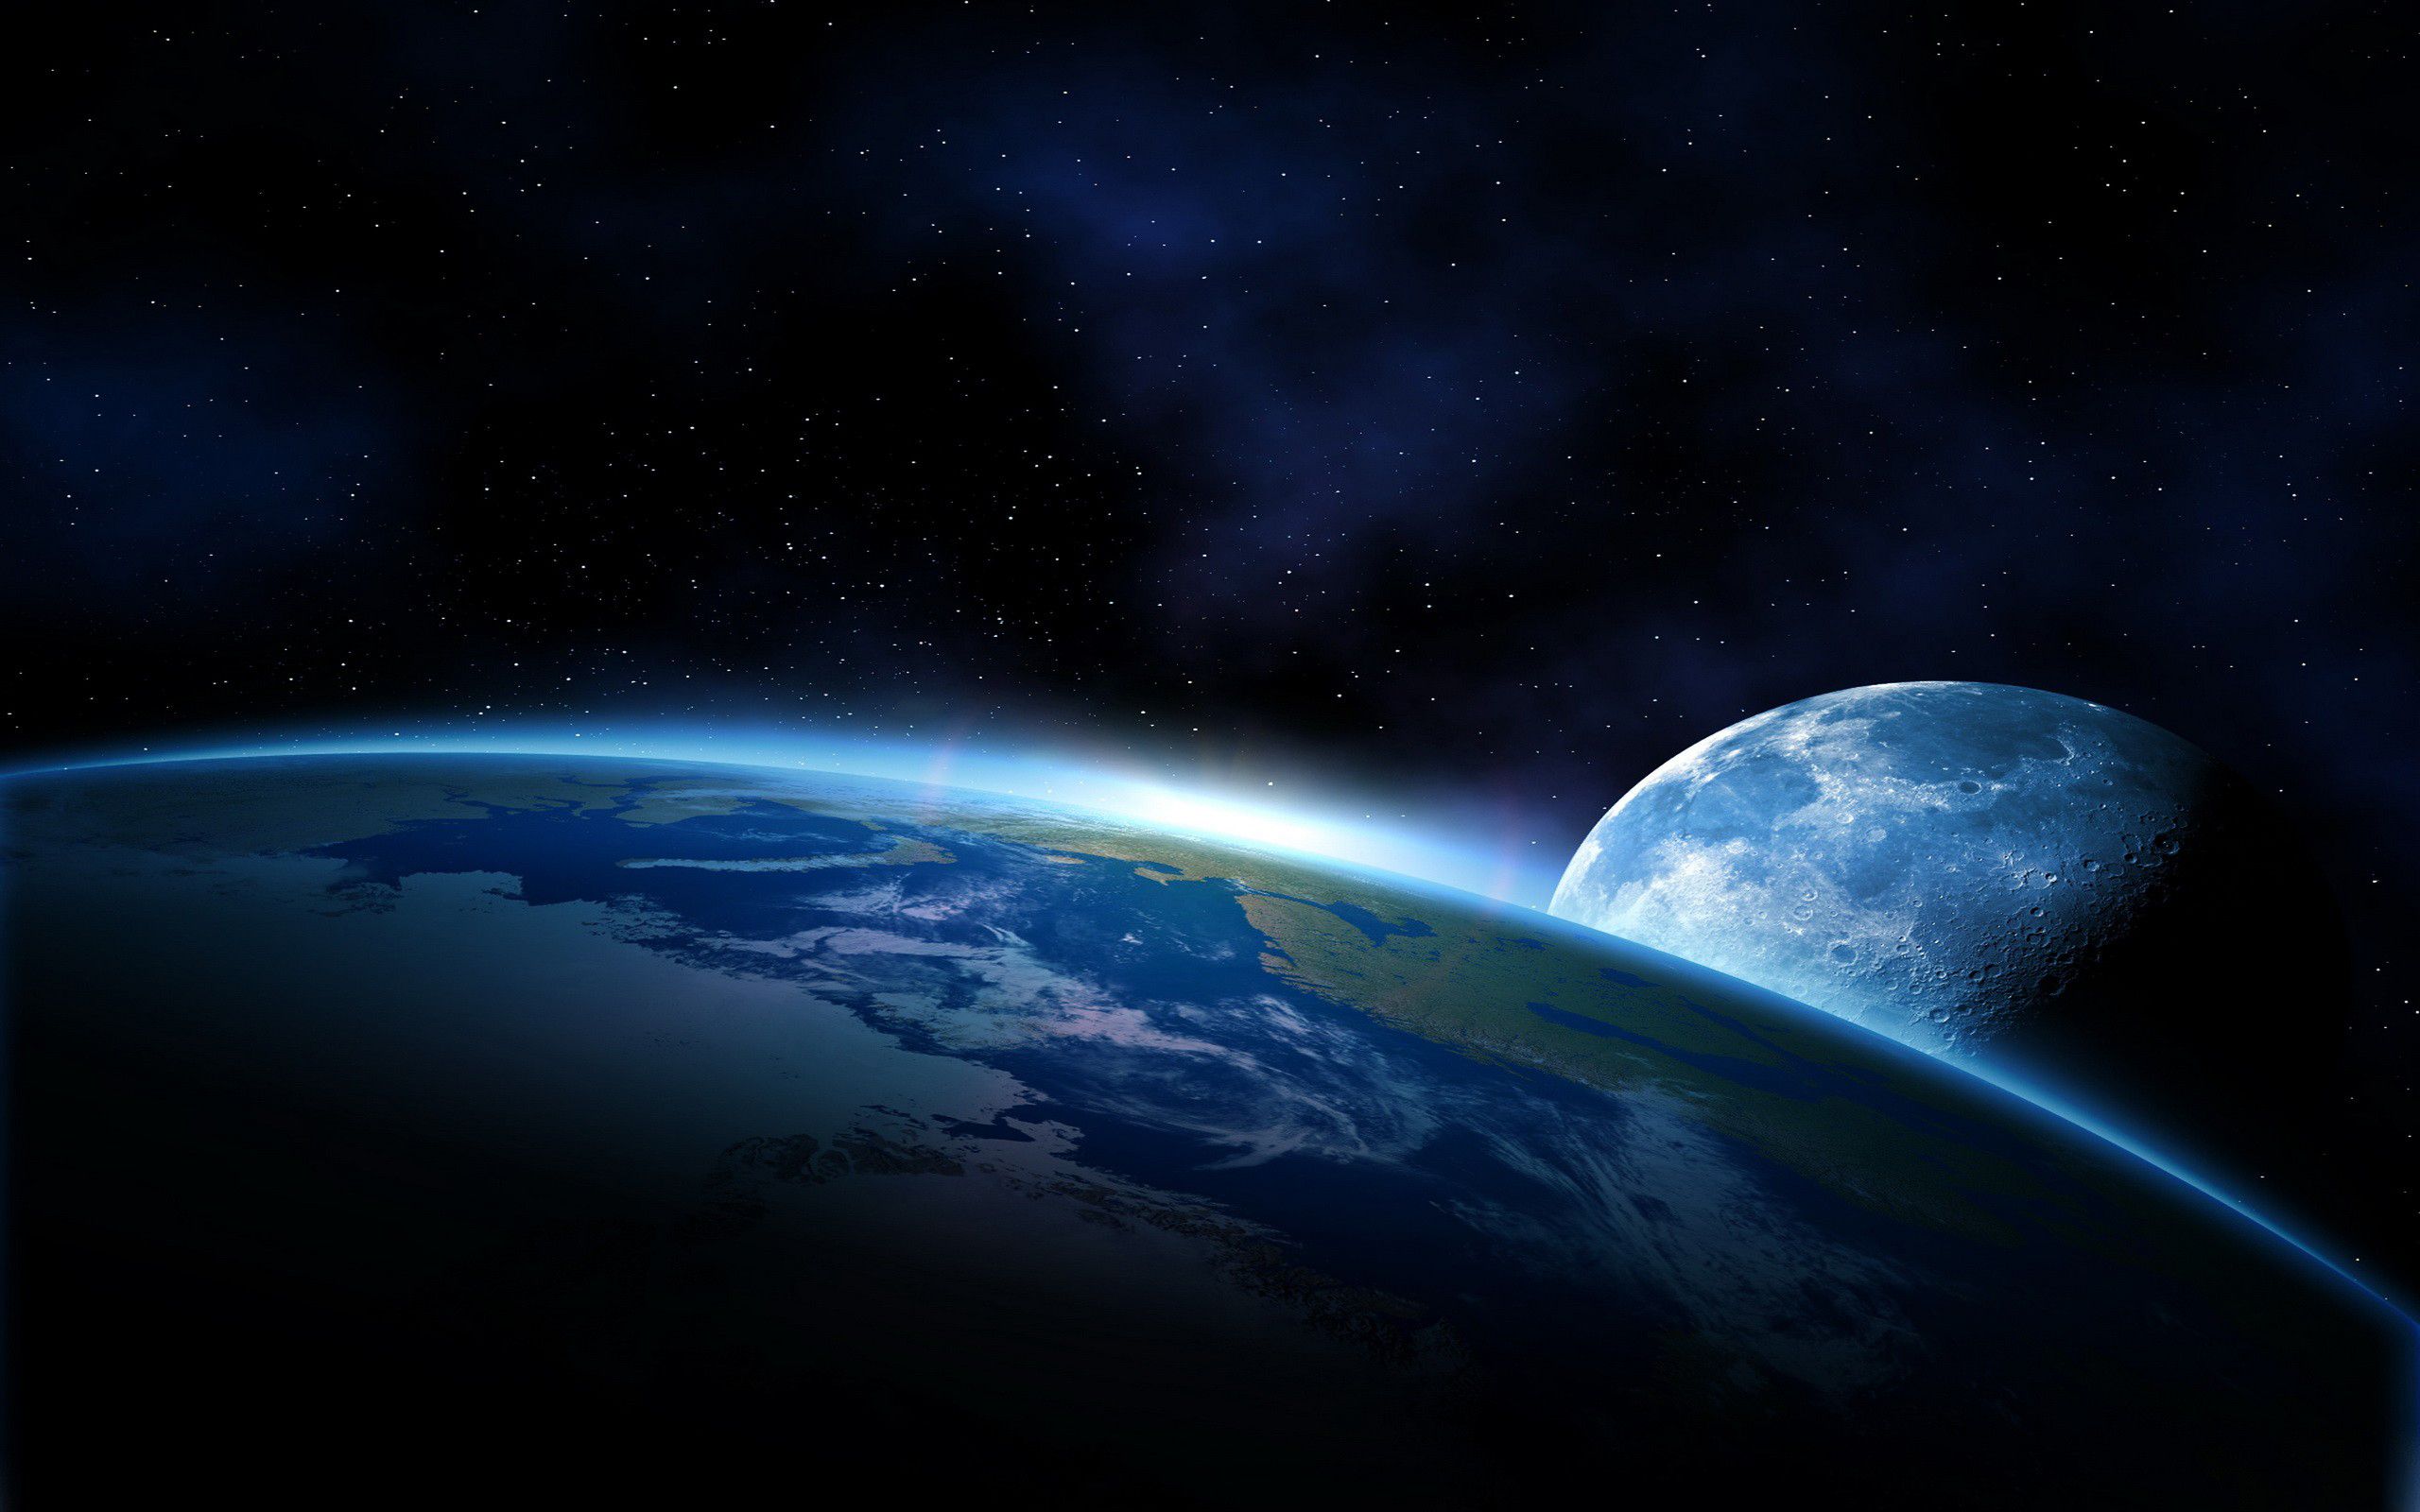 Earth Atmosphere From Space Wallpapers